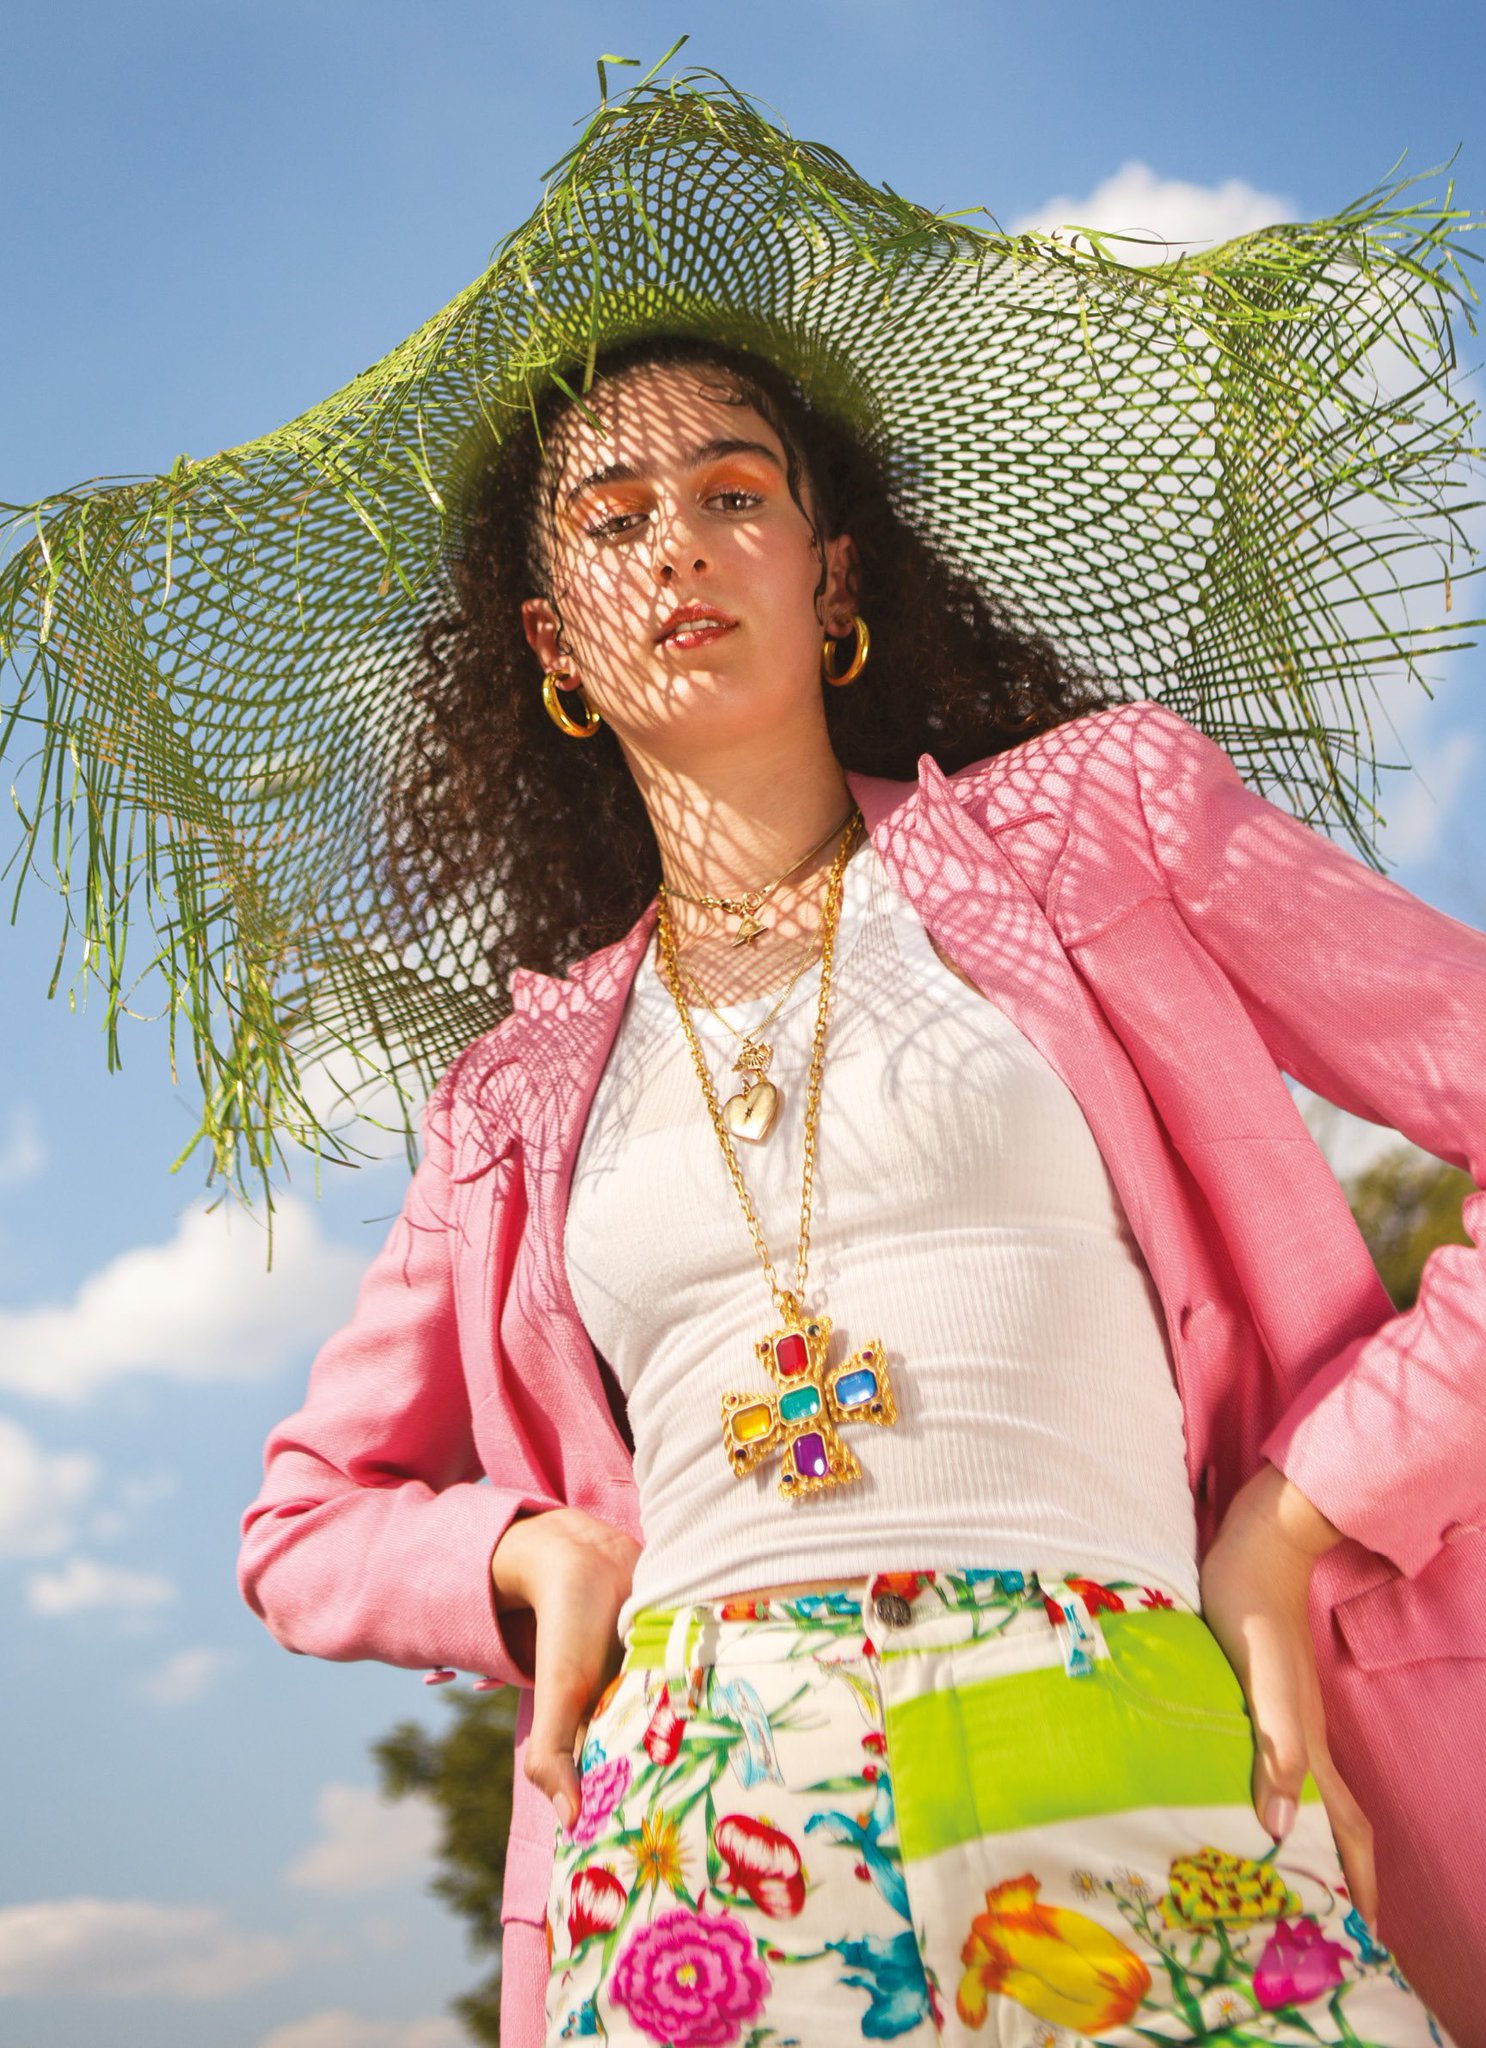 Olivia in funky clothing, with the sky in the background, on set in a collaboration with Depop.